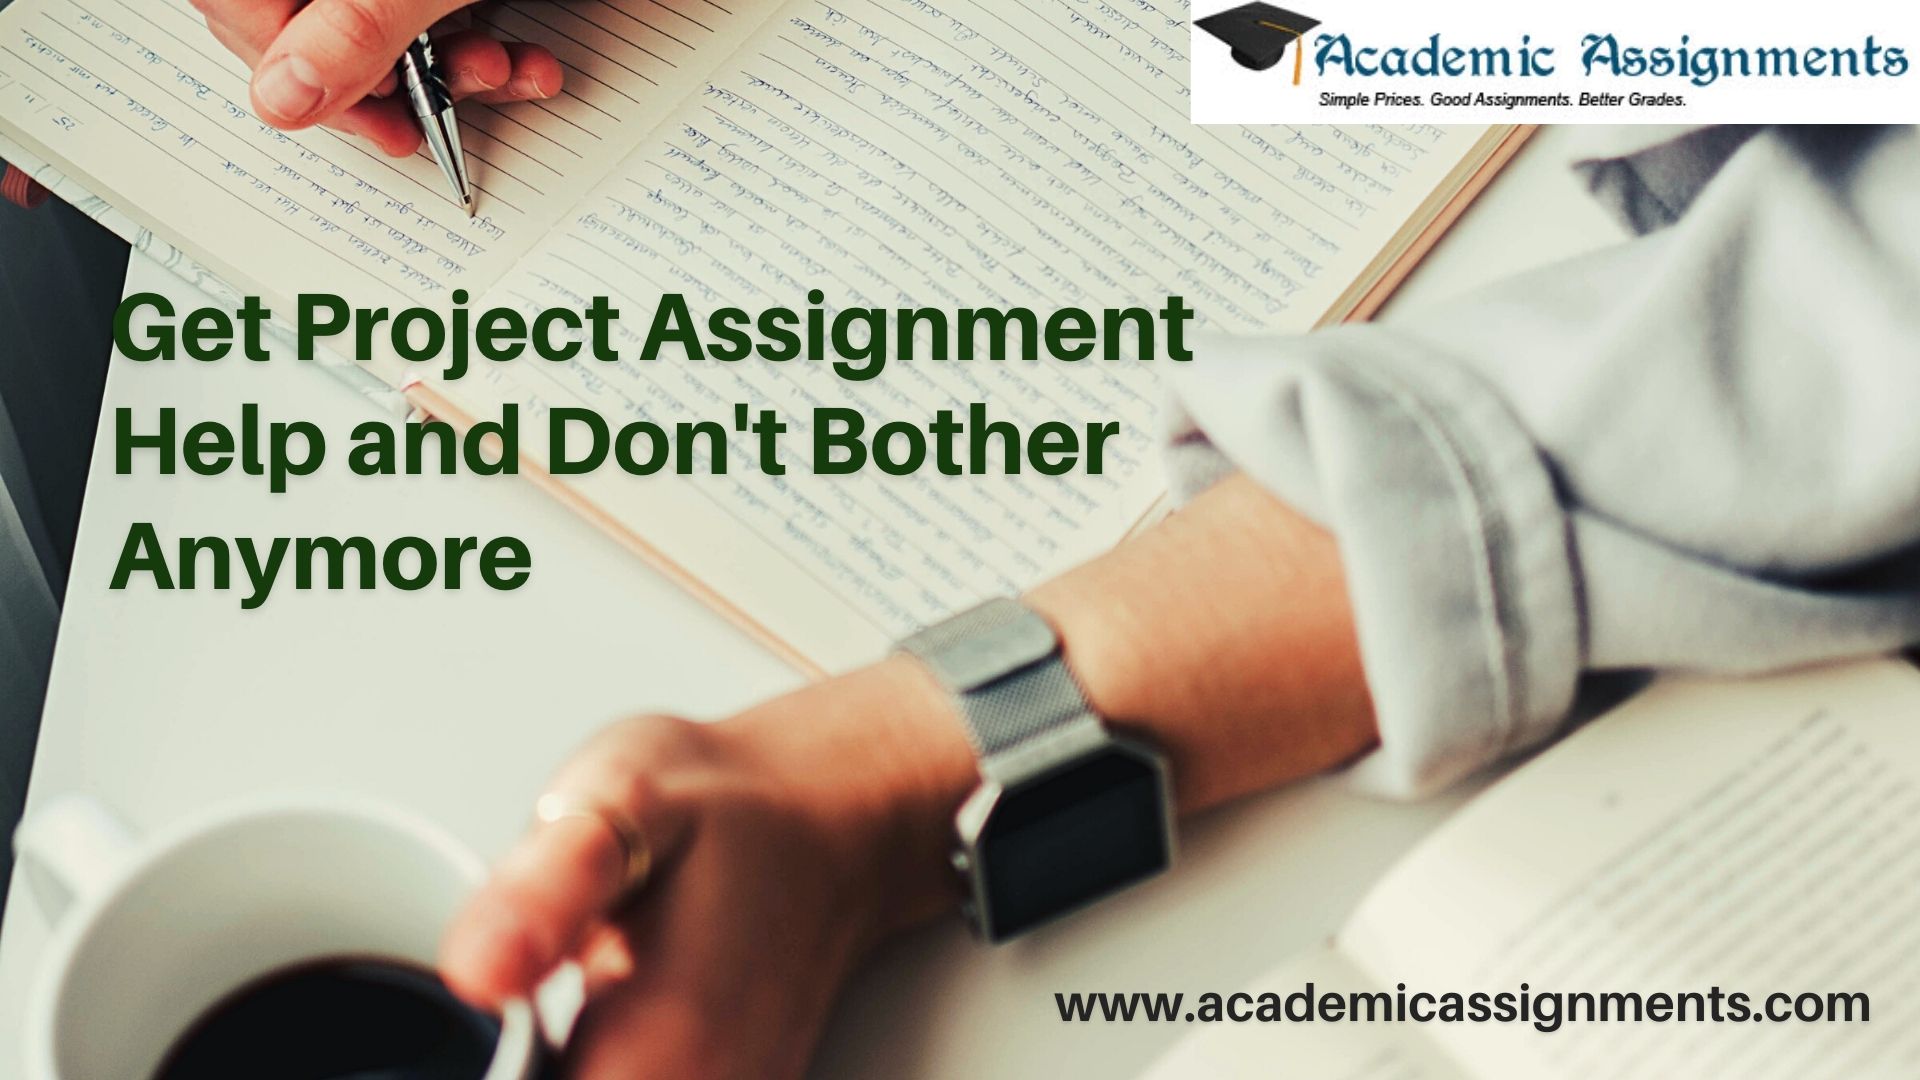 Get Project Assignment Help and Dont Bother Anymore